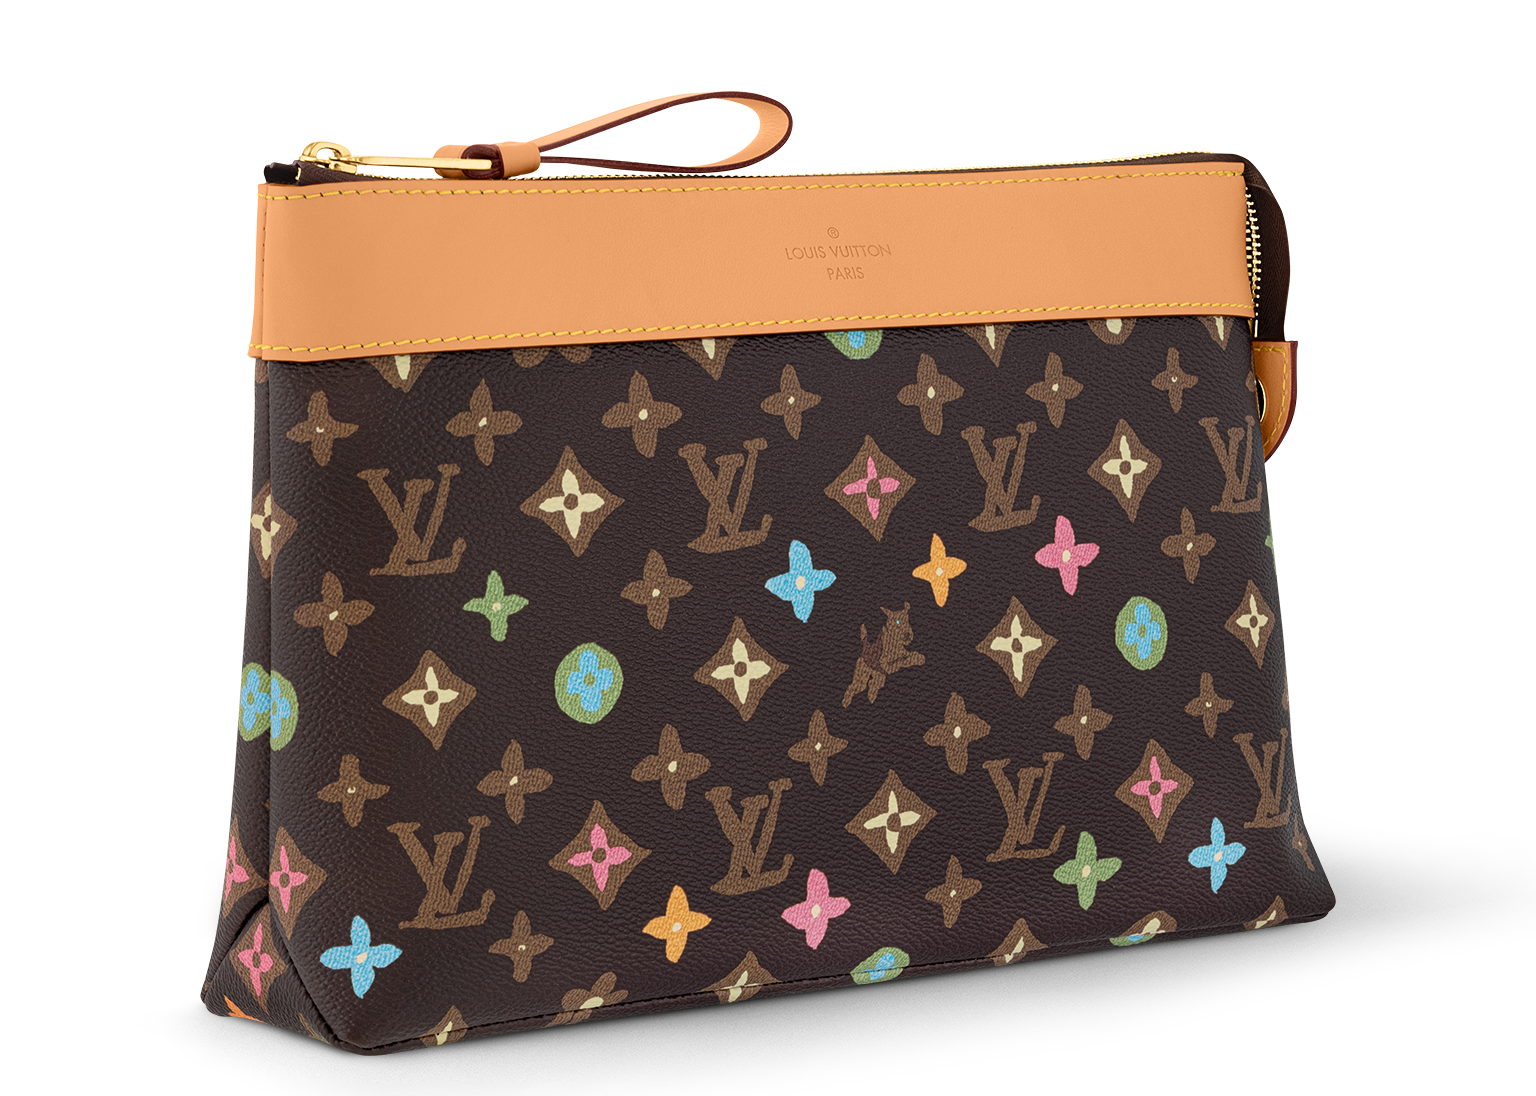 Louis Vuitton by Tyler, the Creator Jumping Dog Tie Brown